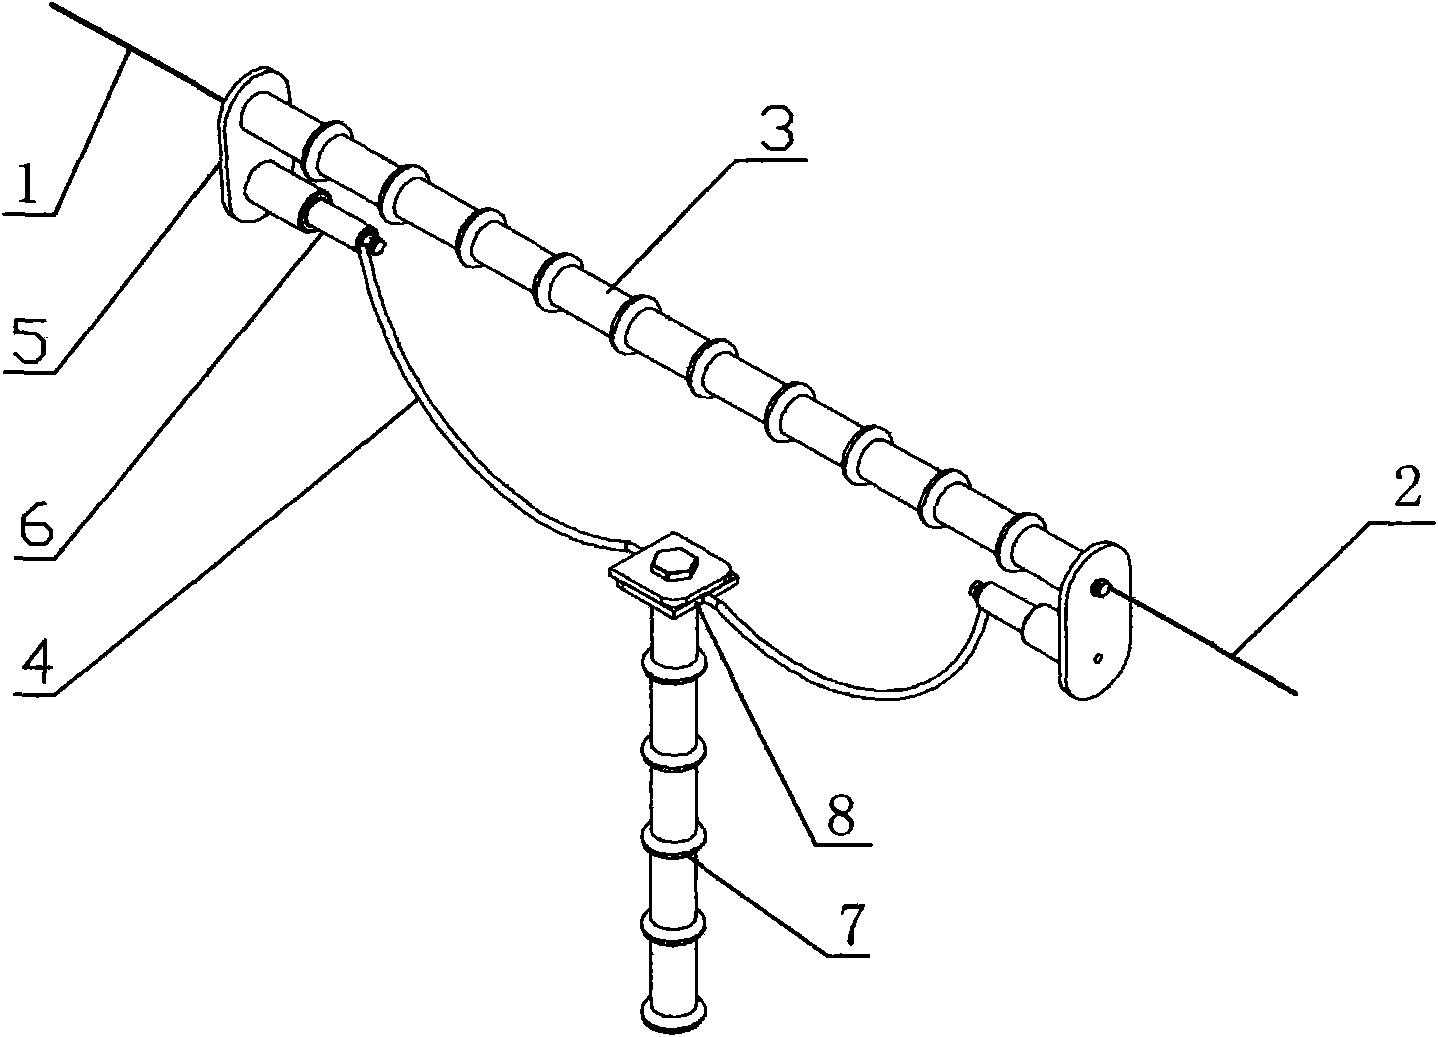 Protective device for high-voltage power equipment